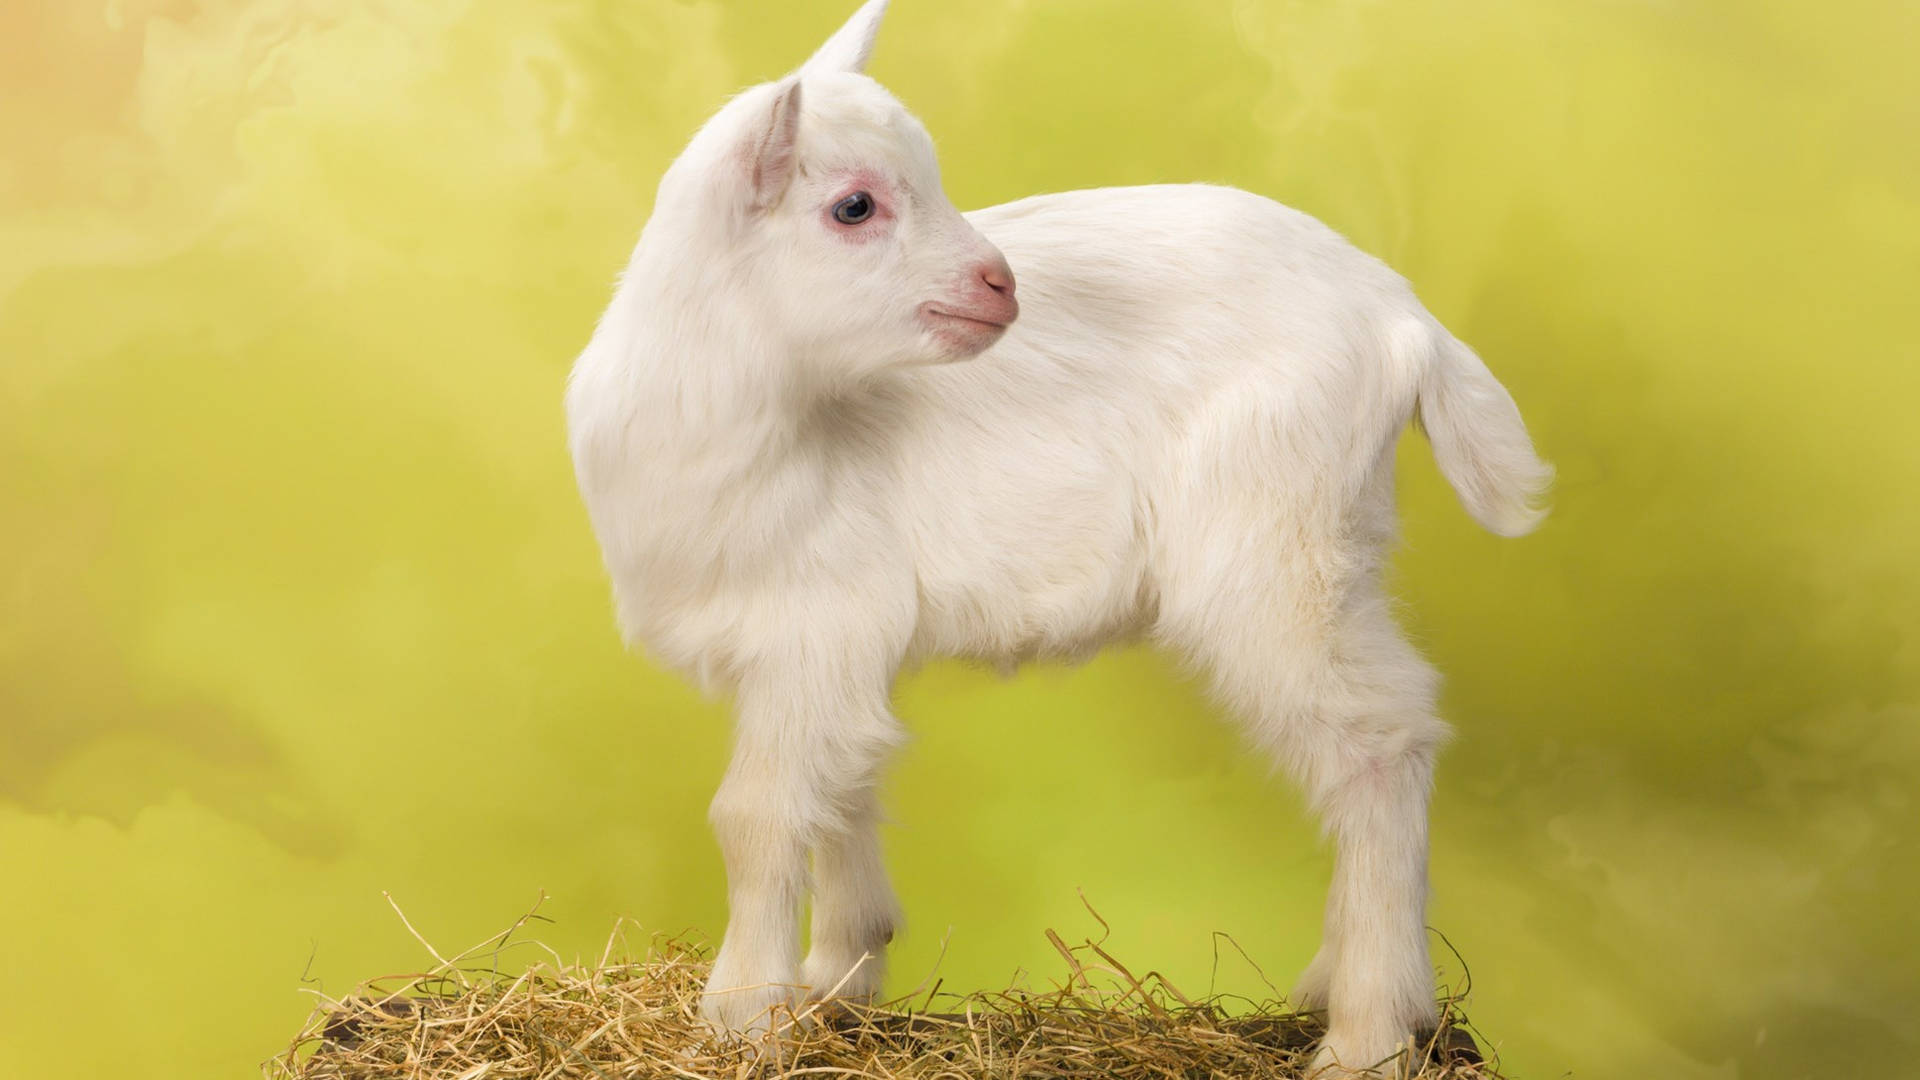 Baby Goat Stands On Hay Wallpaper